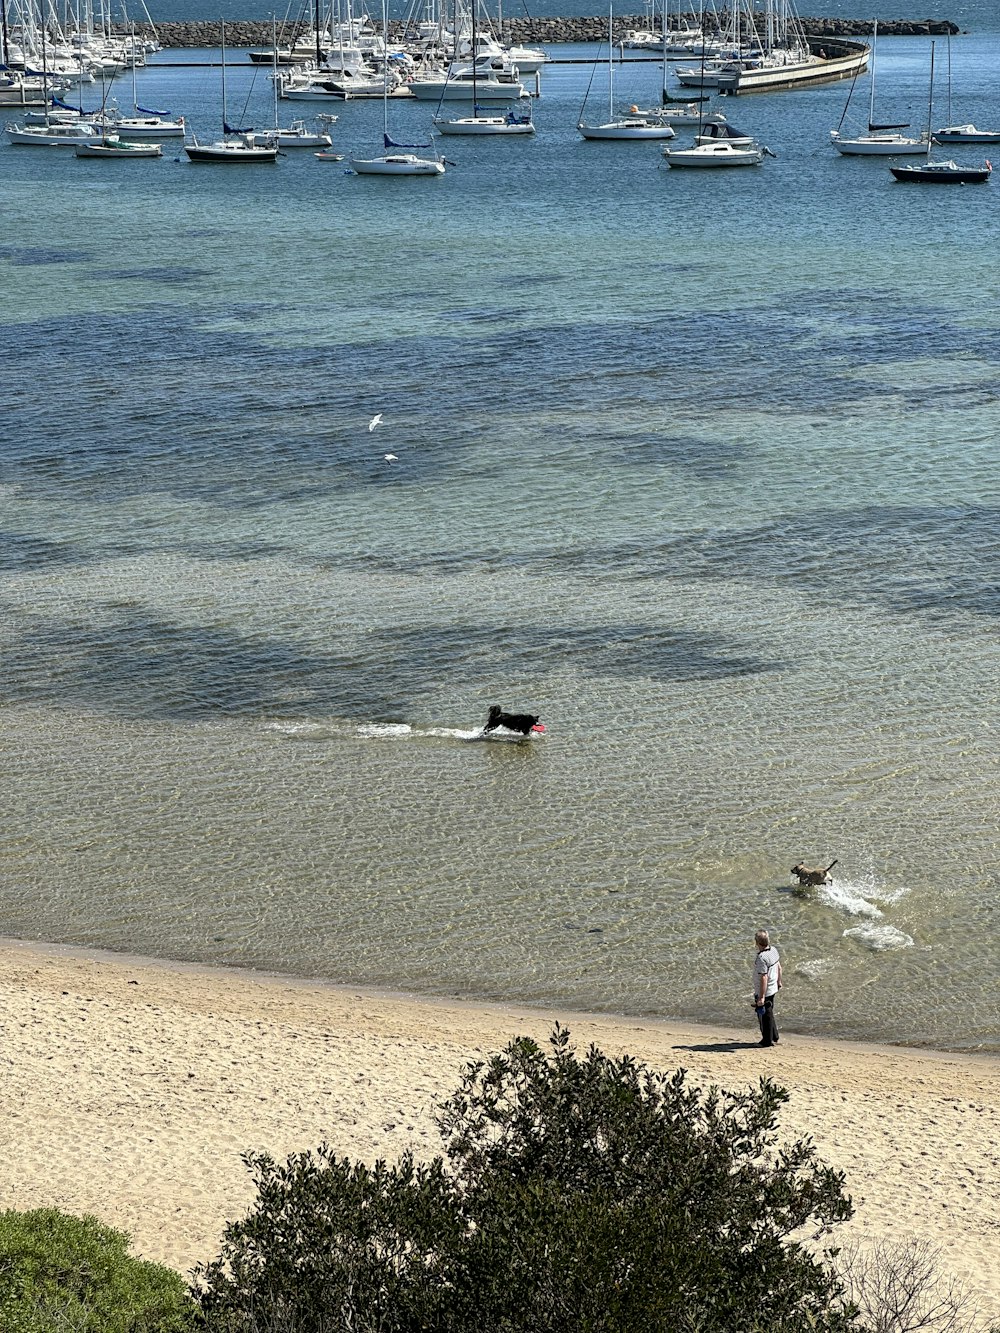 a person and a dog on a beach with boats in the water